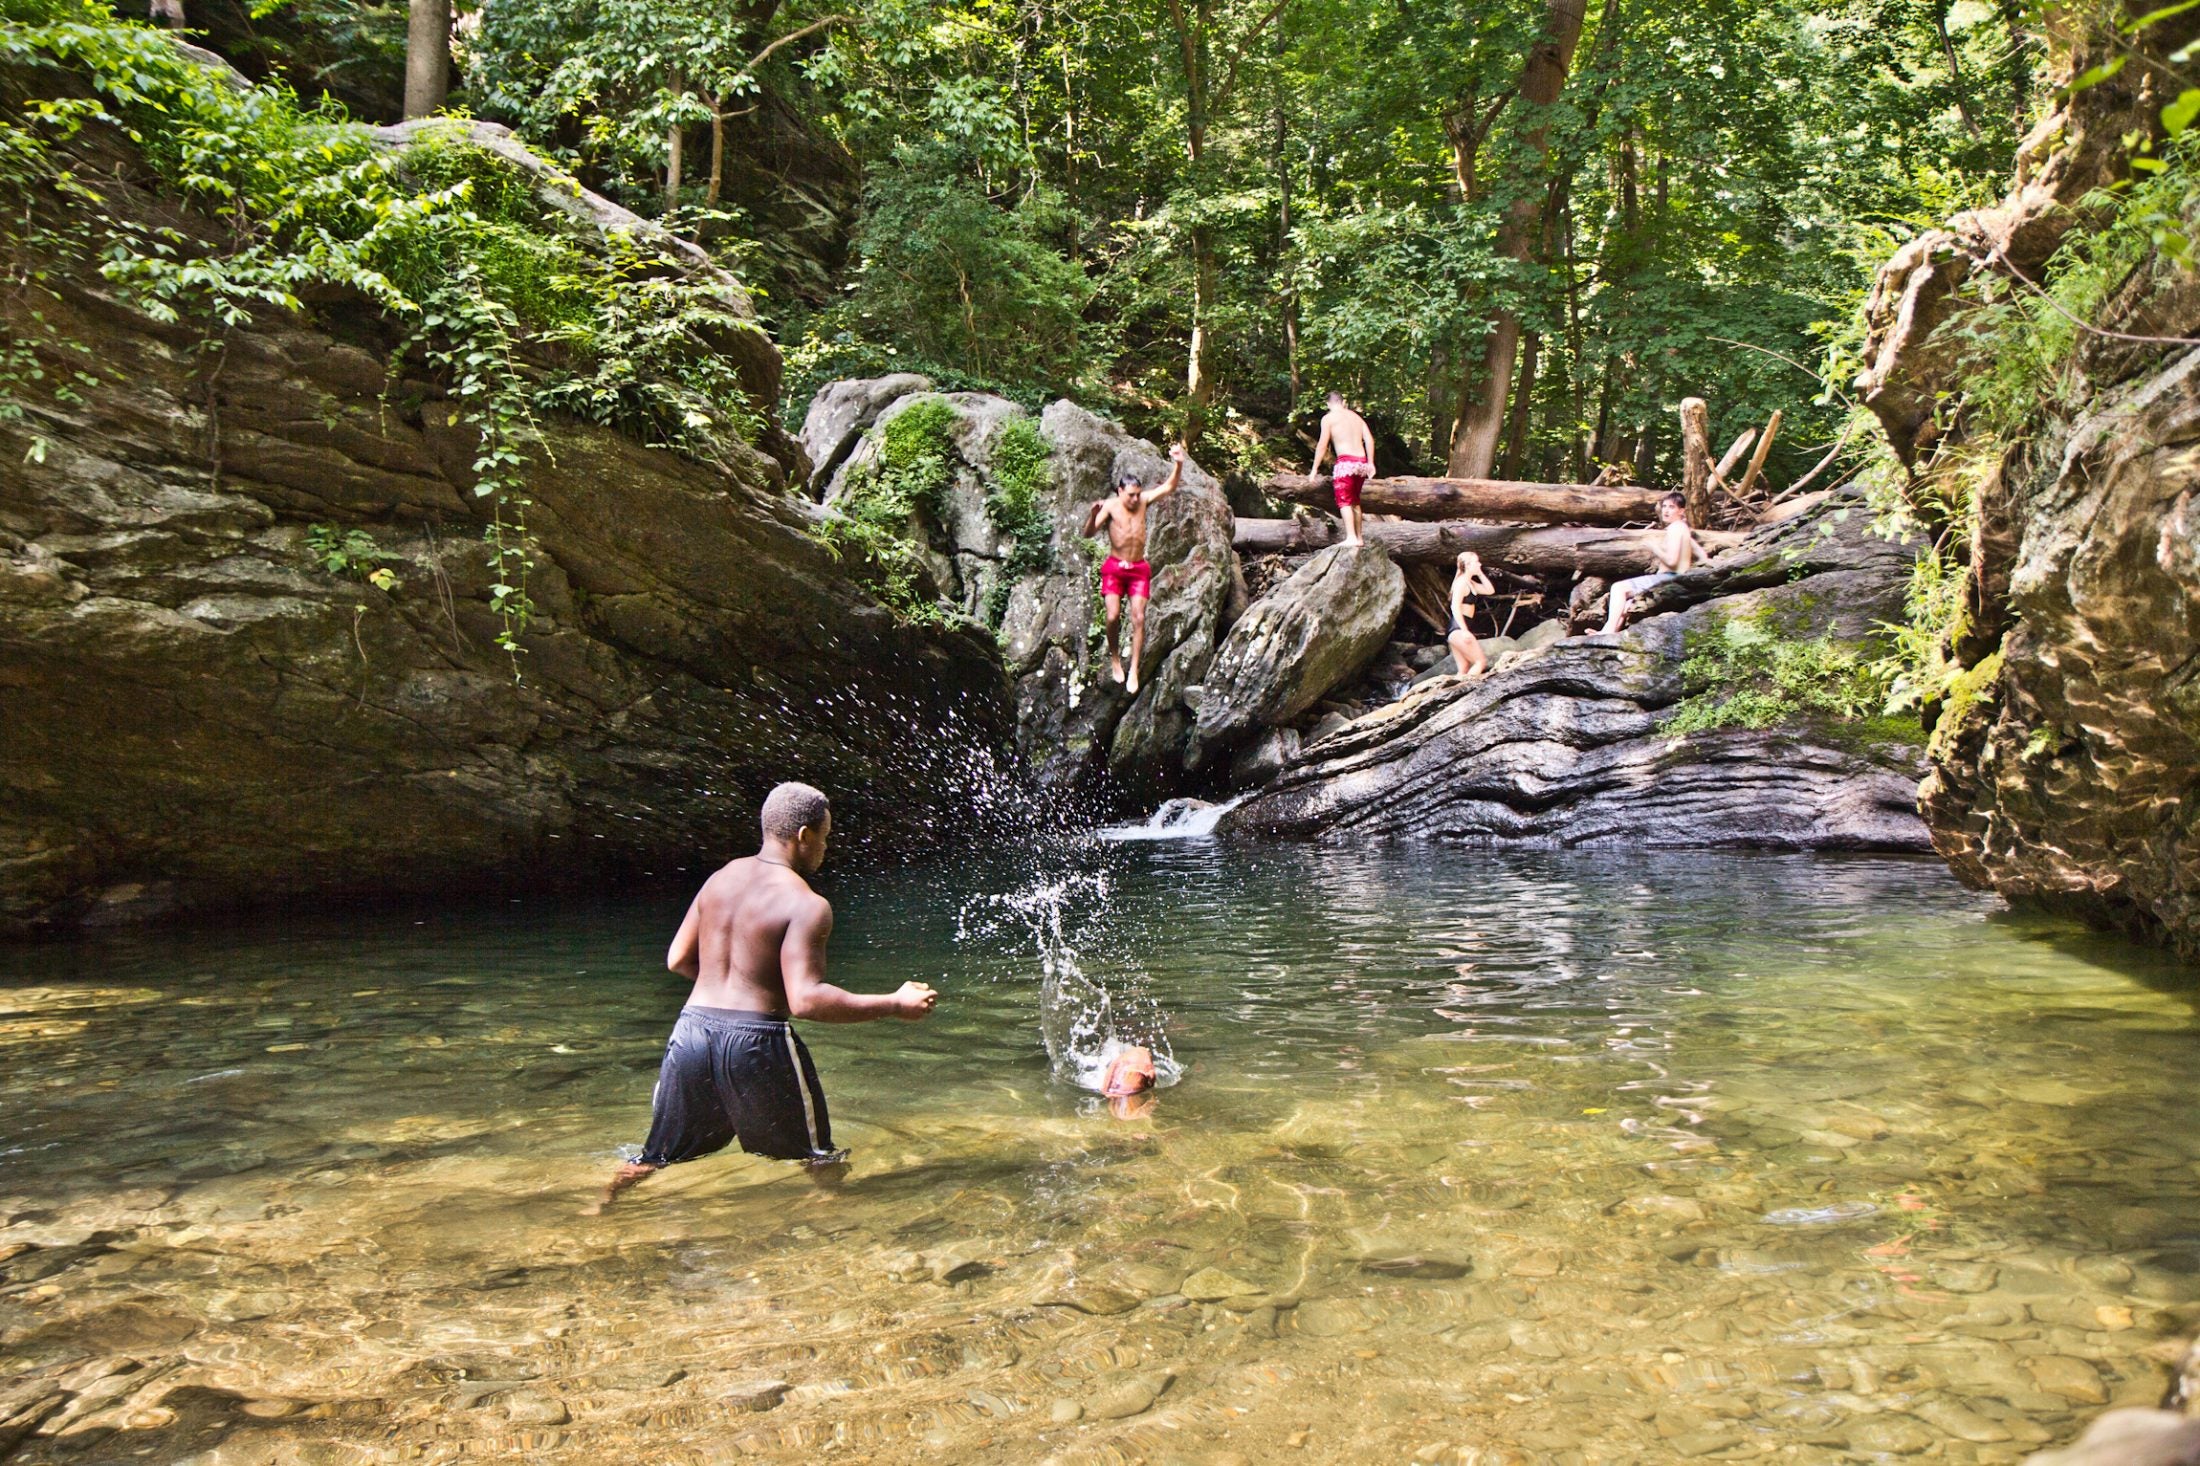 Which streams in the Delaware Watershed are too dirty for swimming and fishing?